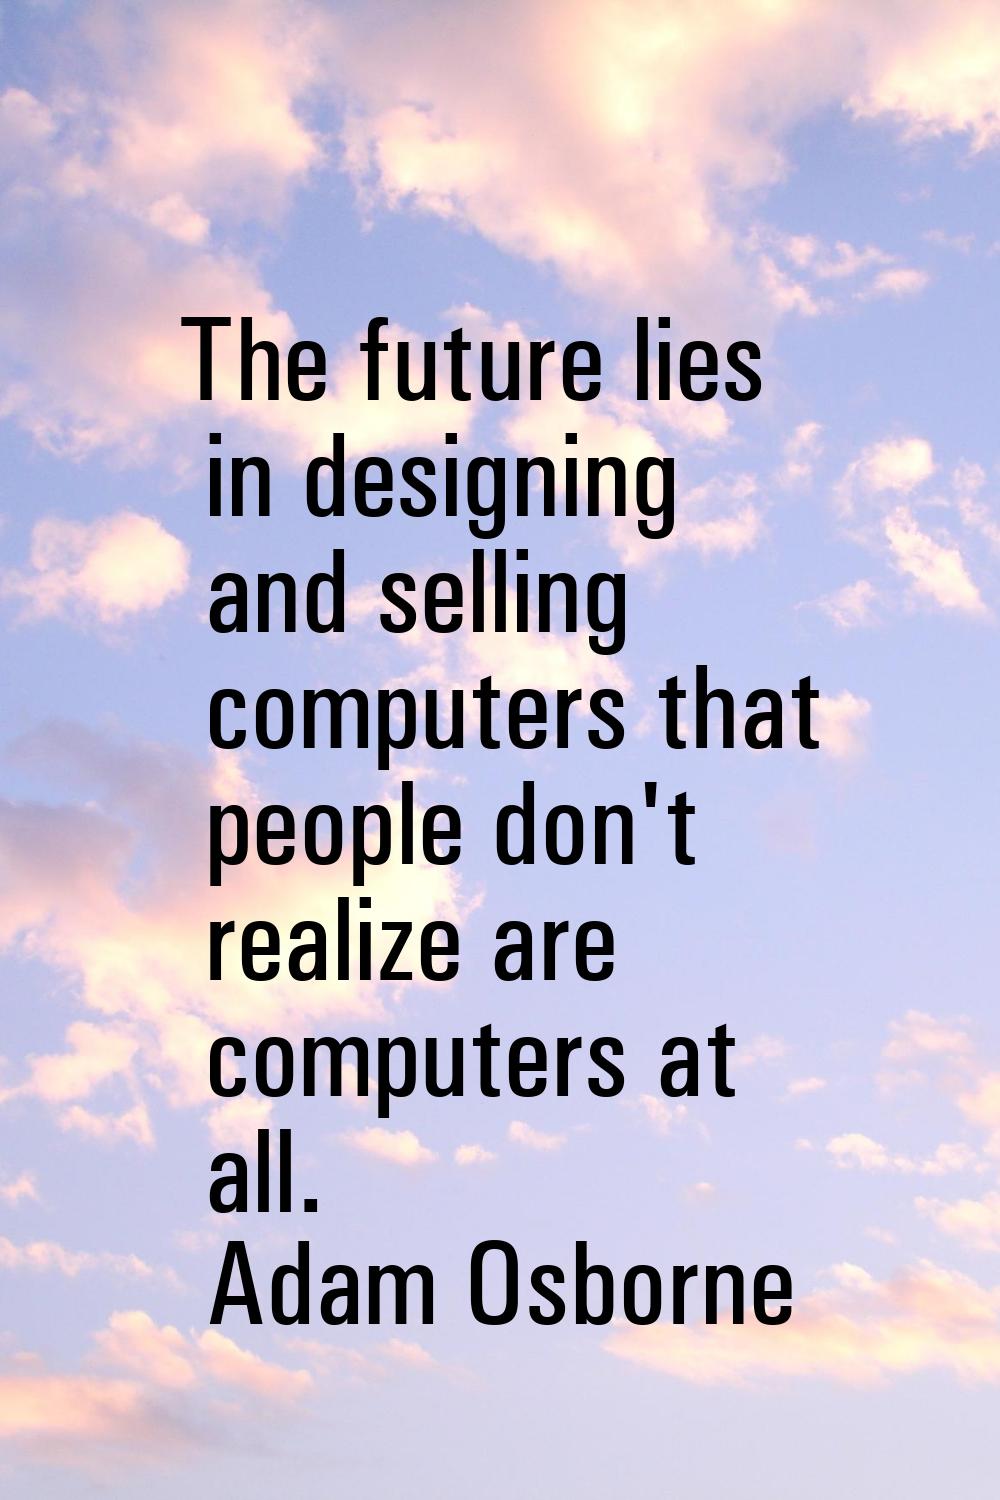 The future lies in designing and selling computers that people don't realize are computers at all.